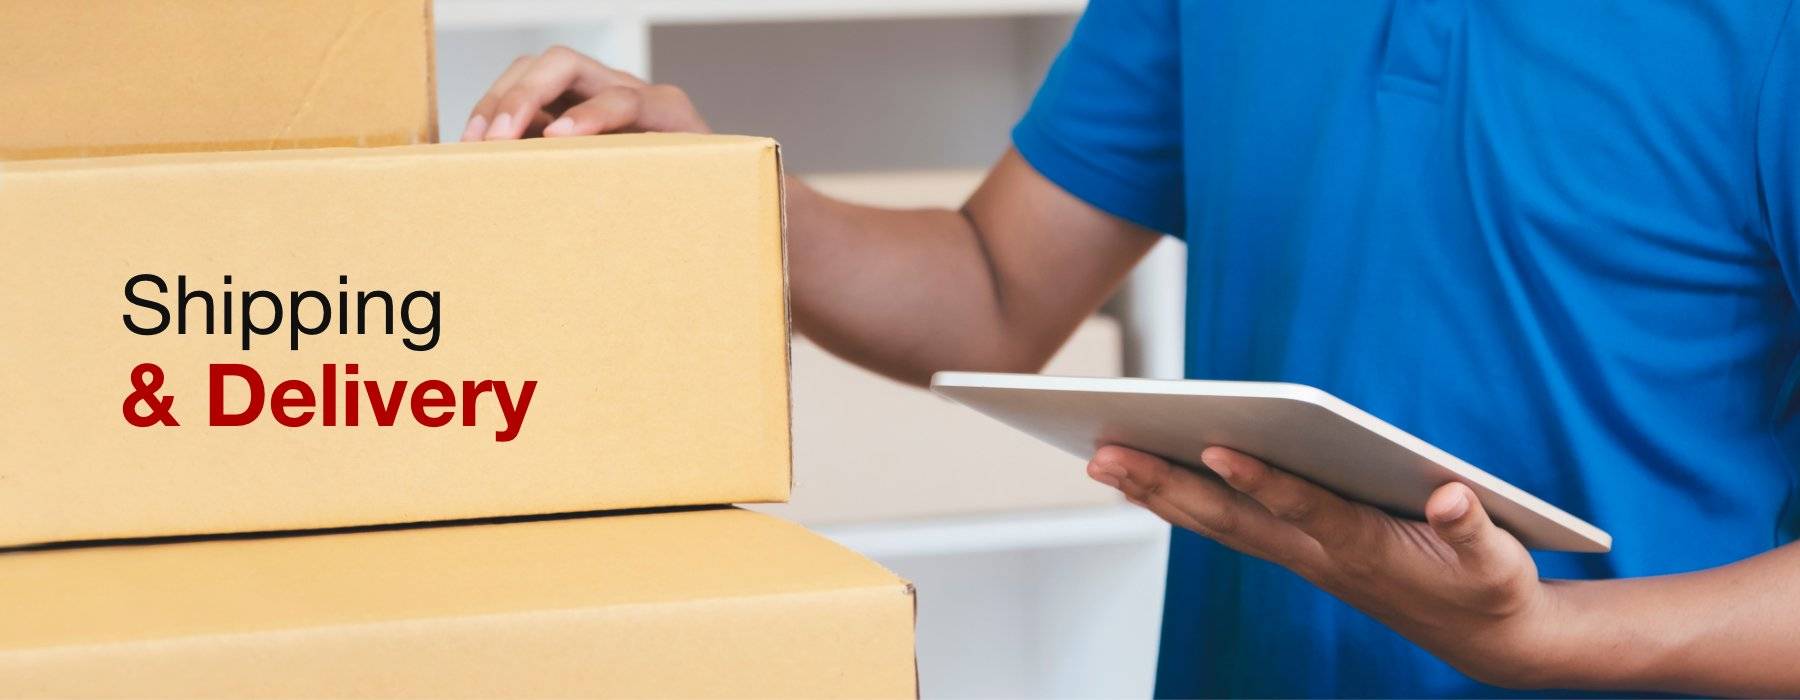 Frequently Asked Questions about Shipping and Delivery